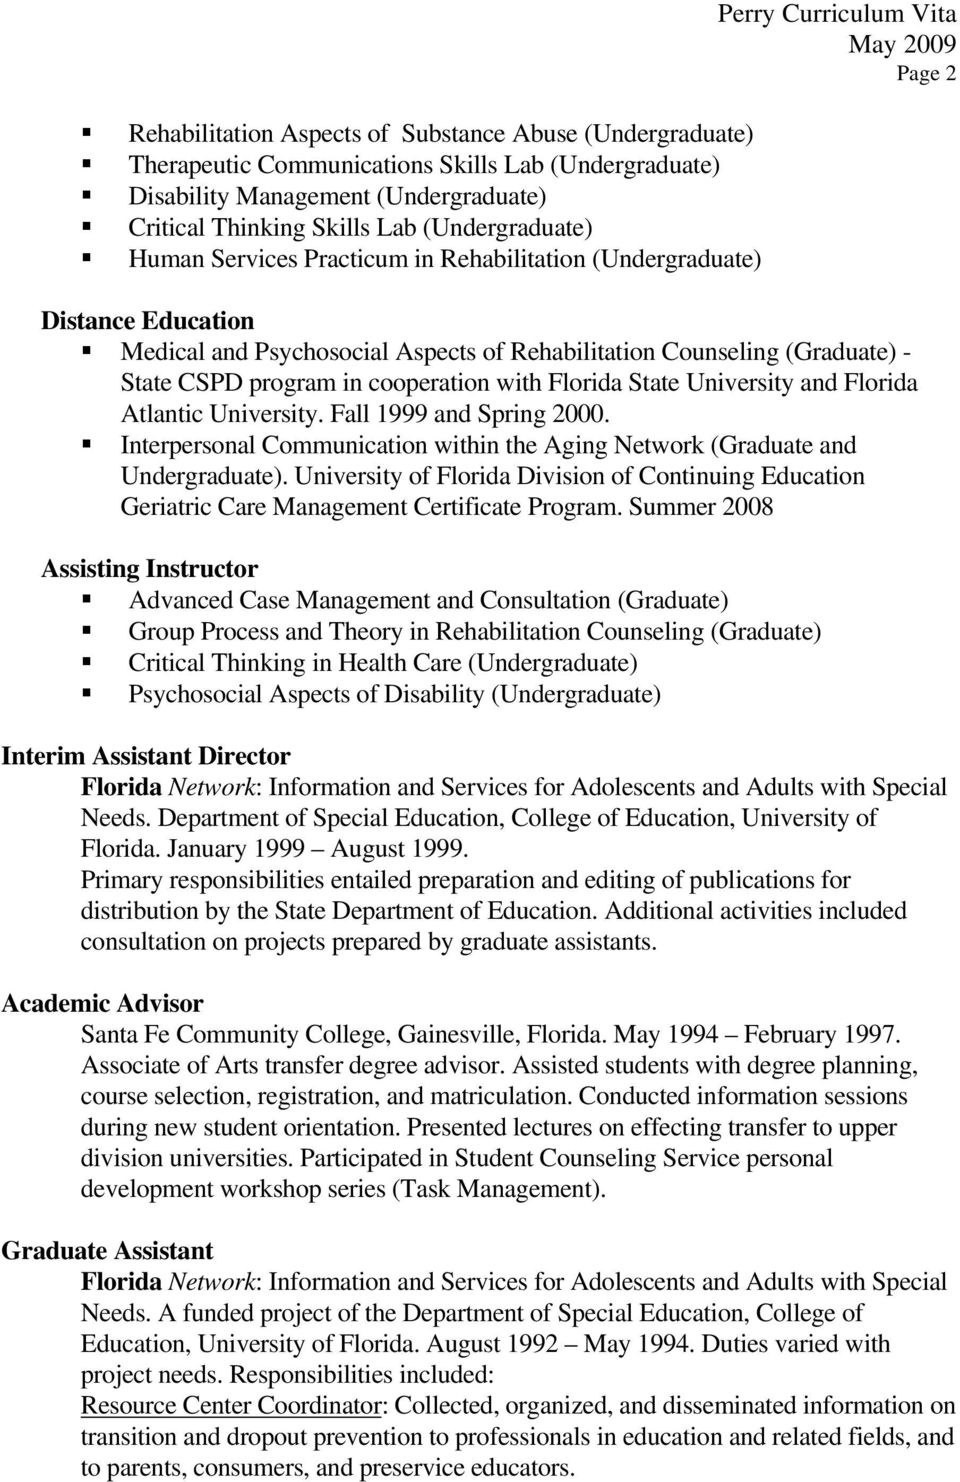 program in cooperation with Florida State University and Florida Atlantic University. Fall 1999 and Spring 2000. Interpersonal Communication within the Aging Network (Graduate and Undergraduate).